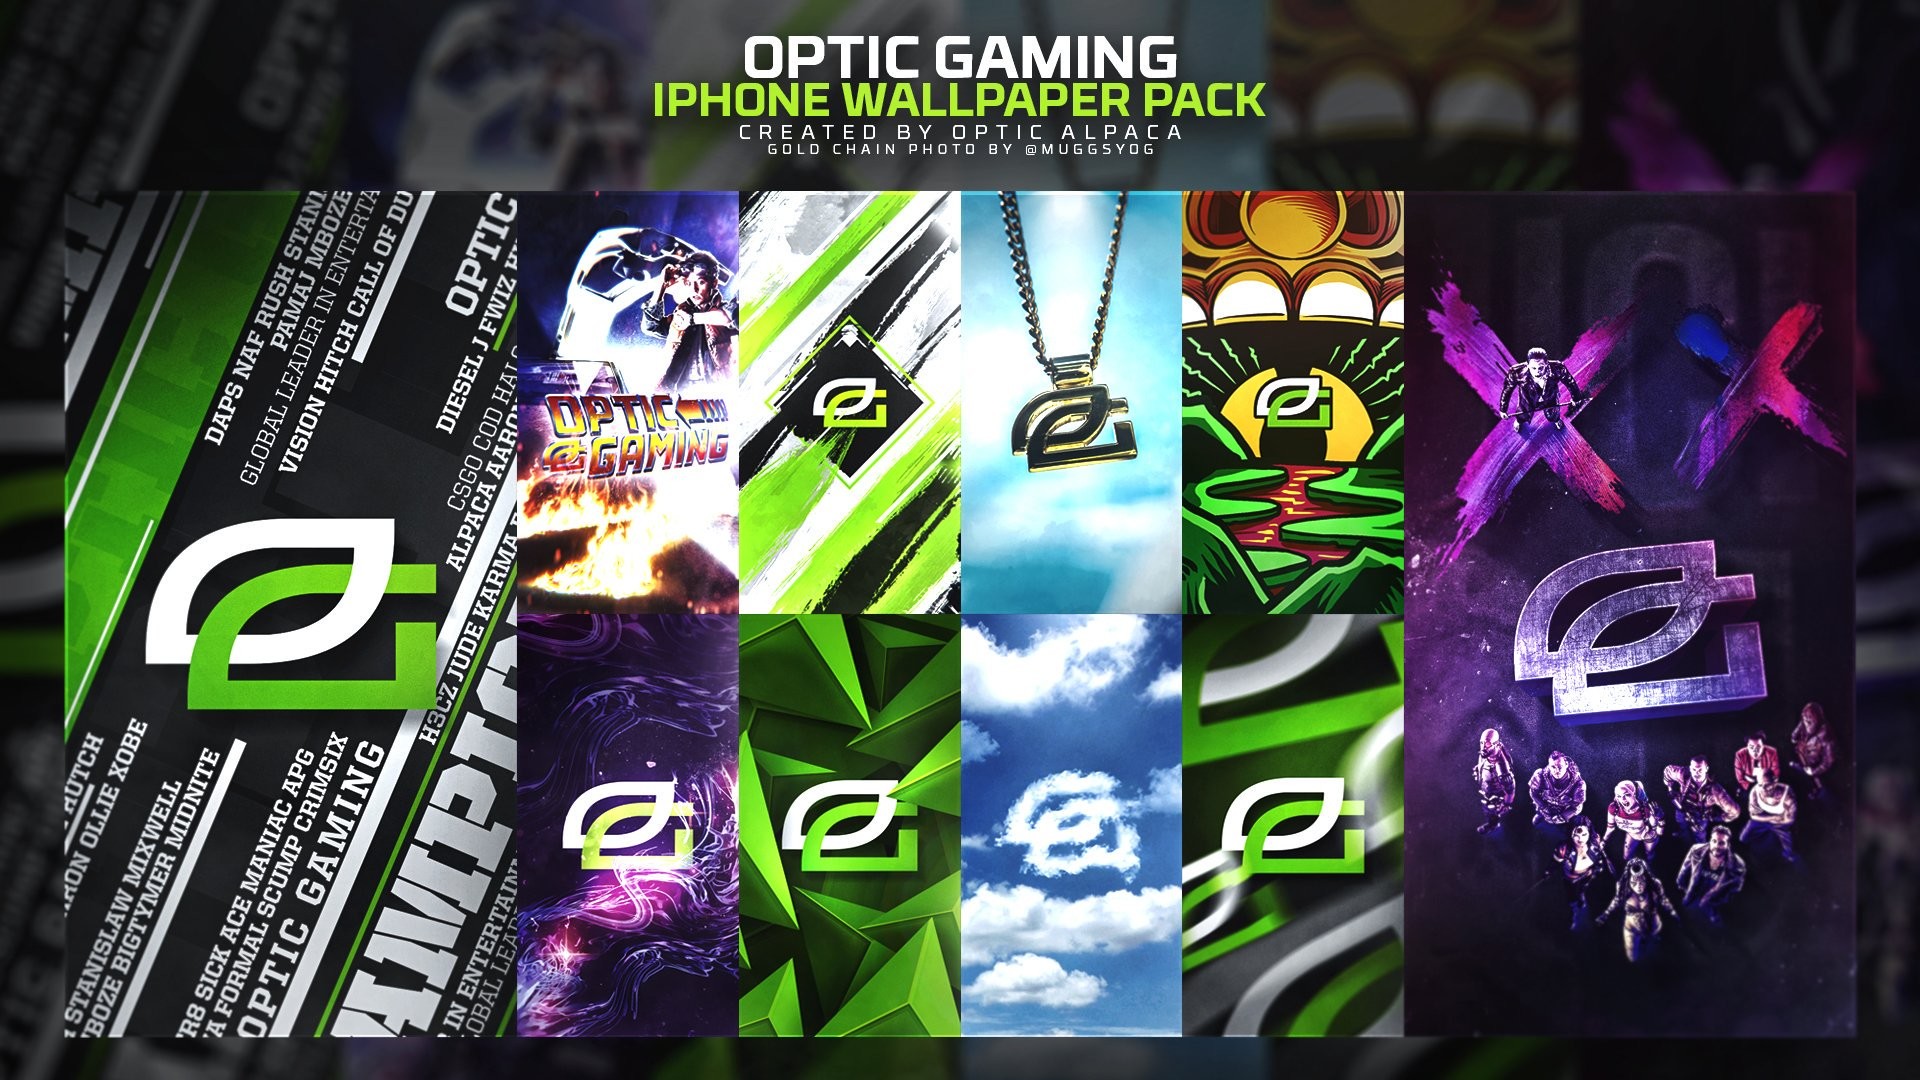 A new Empire OpTic Texas is the new Call of Duty League team in North Texas